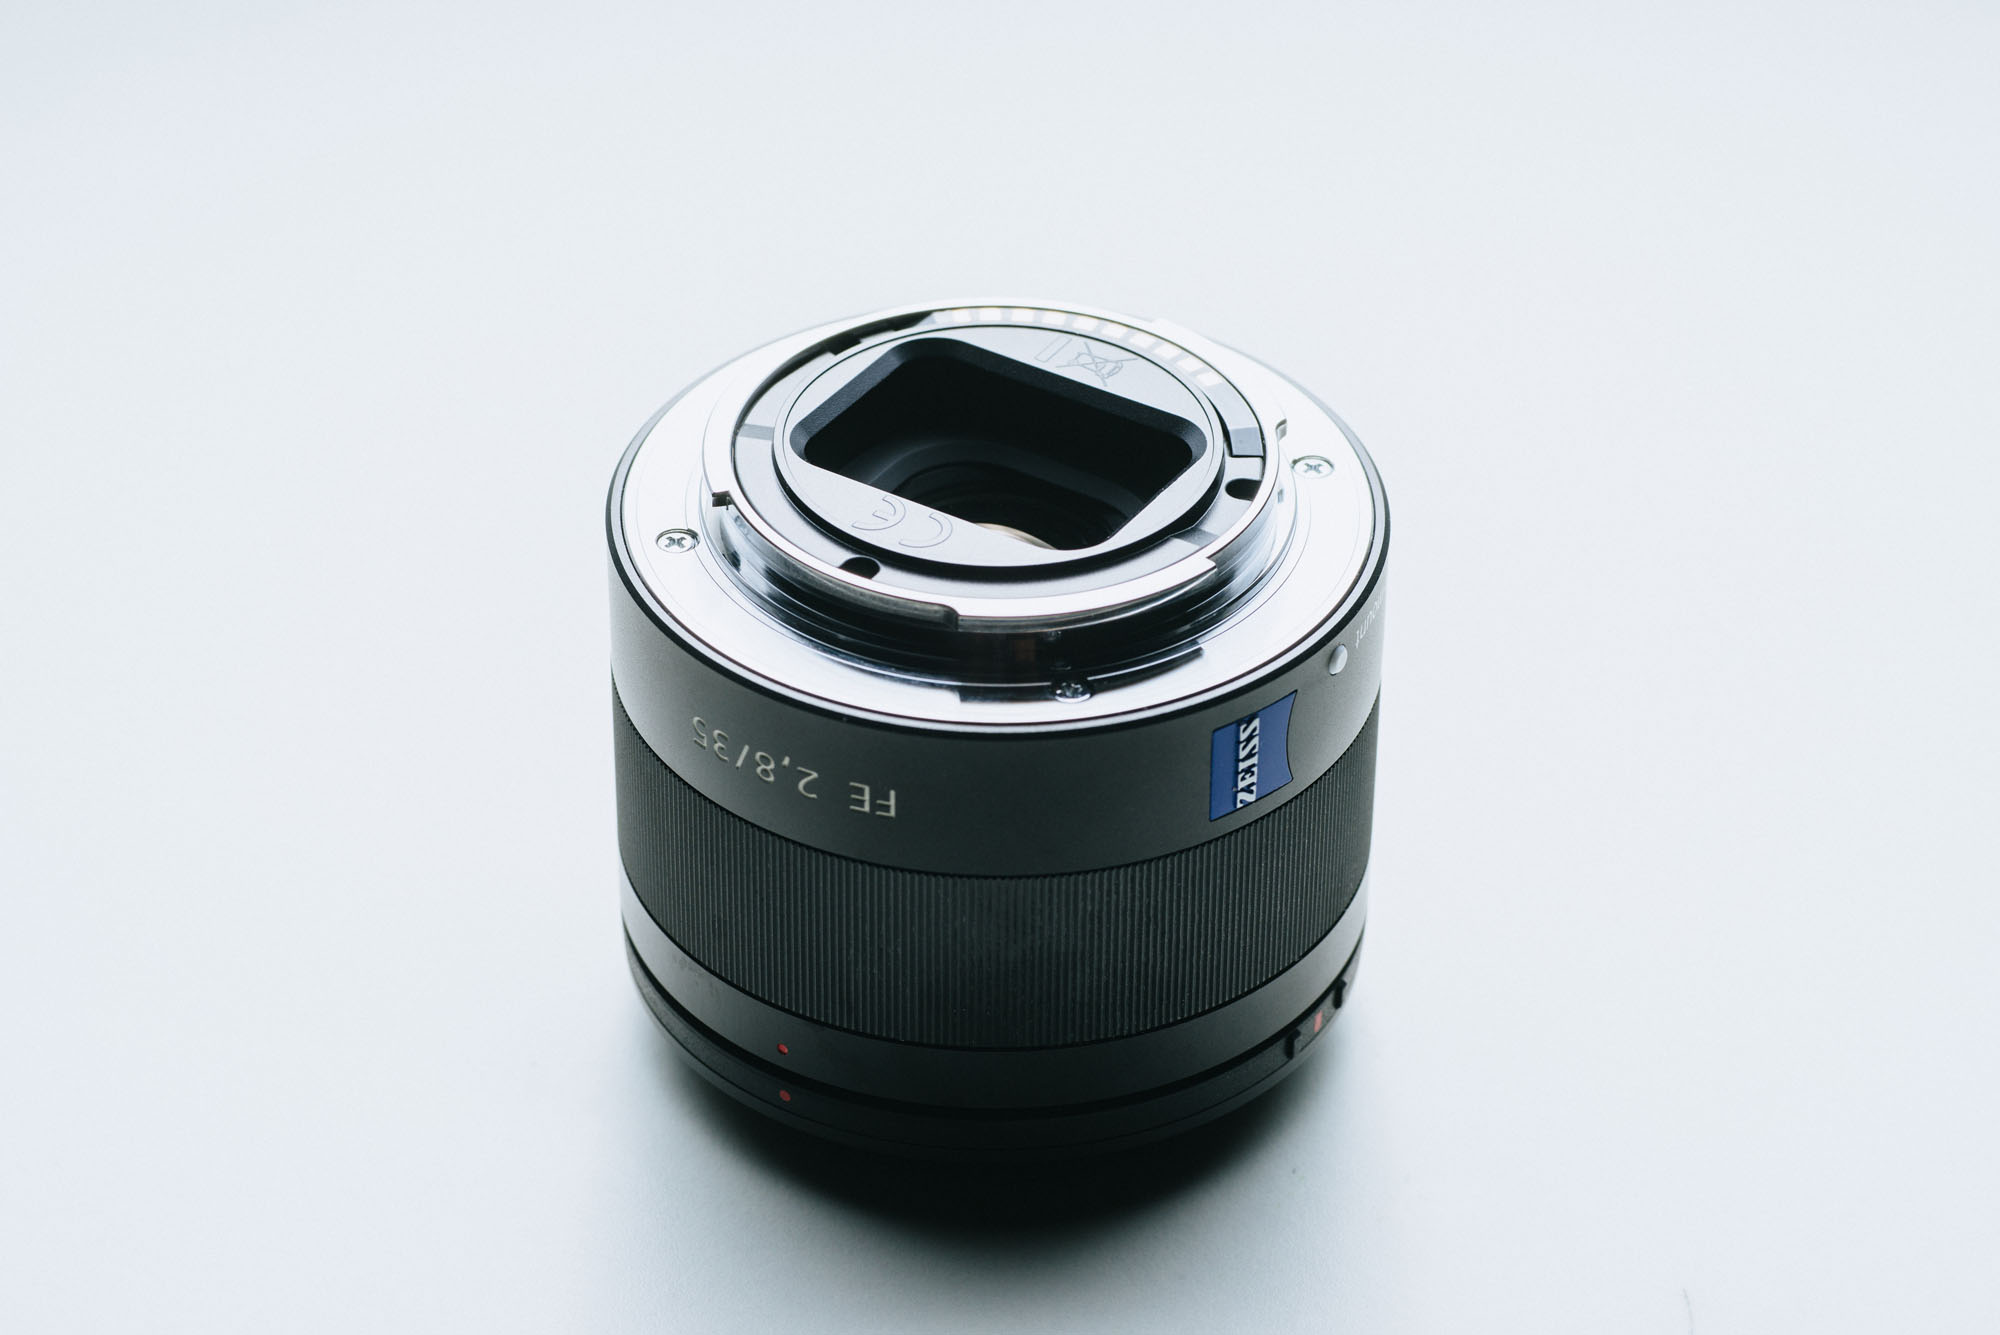 Sony_Zeiss_35mm_f_2.8_review_04